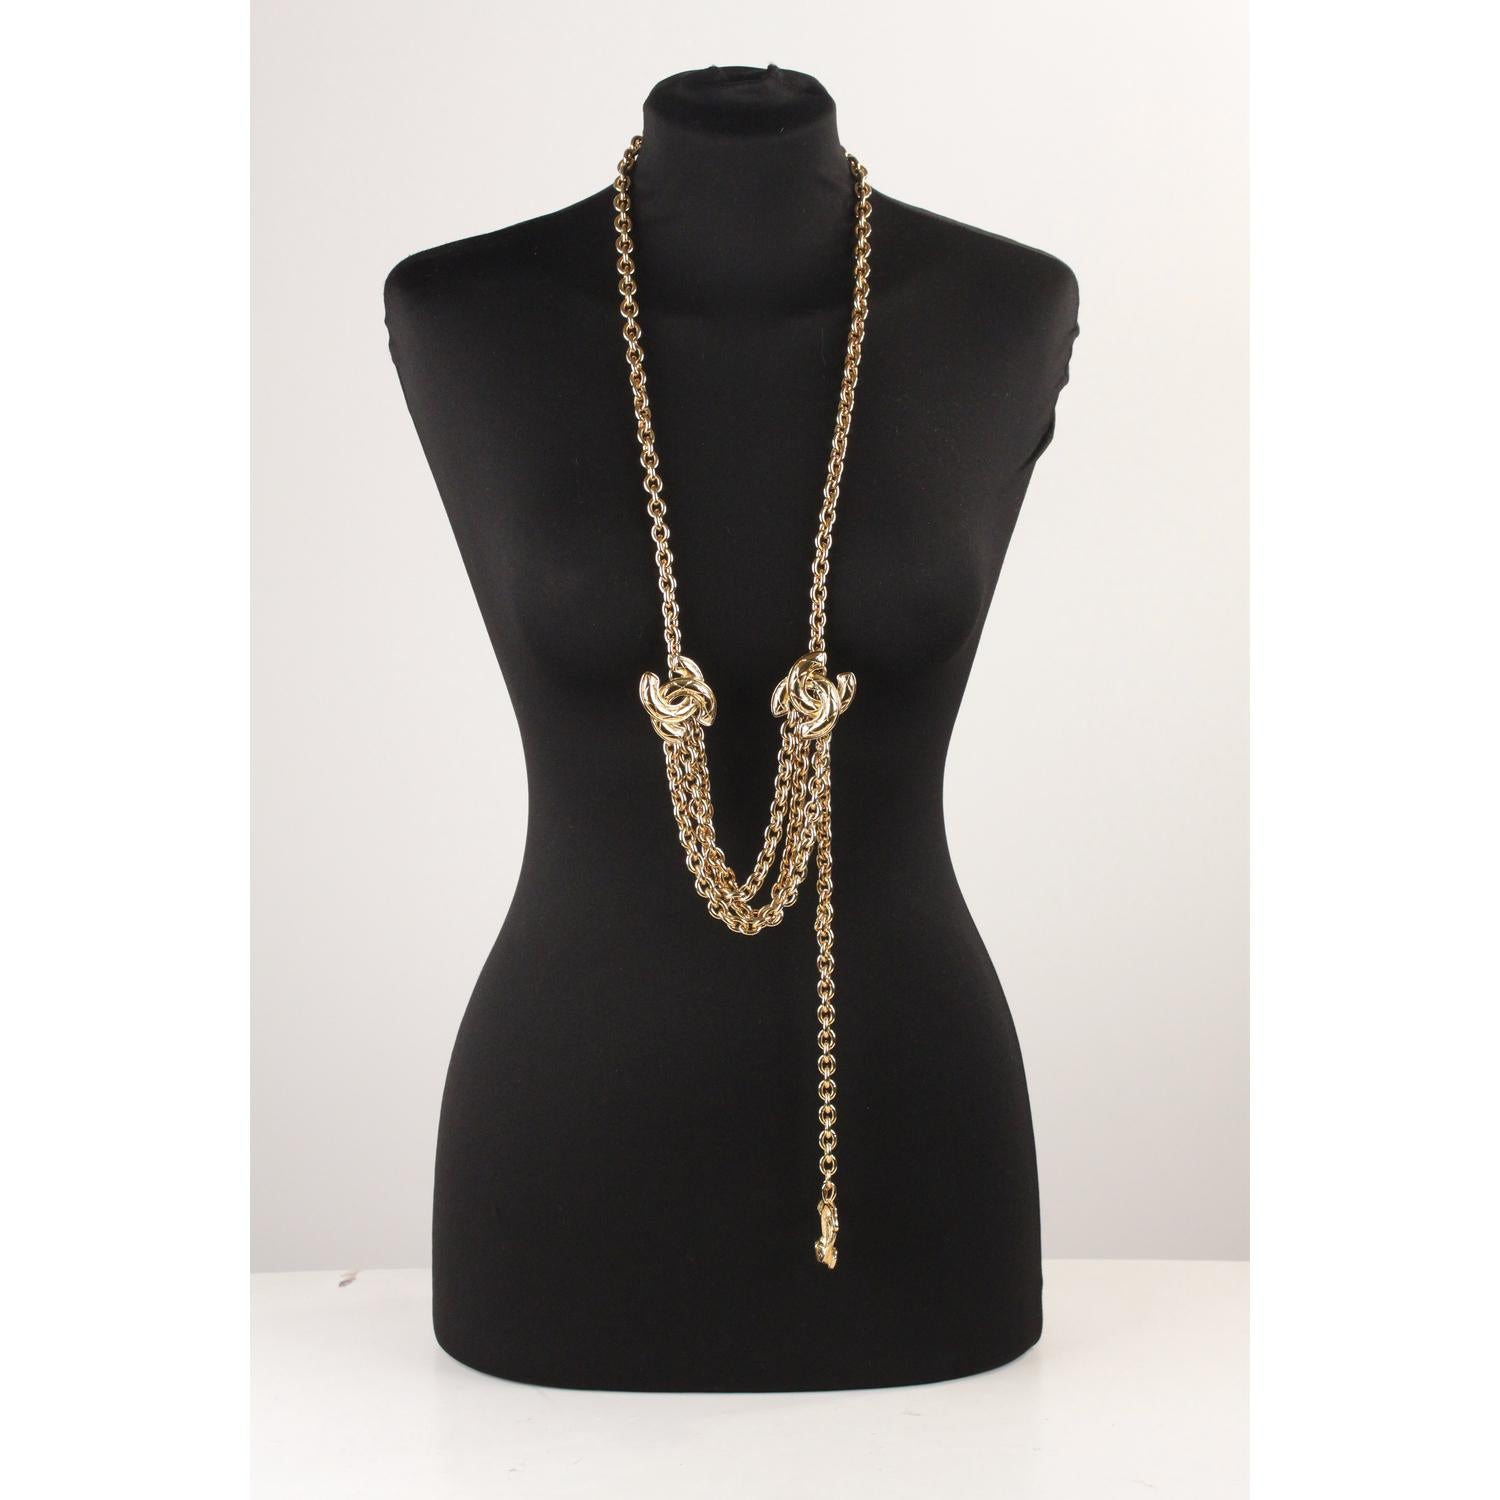 Classic vintage Chanel gold metal chain necklace/belt from the early '80. It is very versatile and will complete every look (you can use it as a necklace or as a belt). Features 'CC CHANEL' logos with quilted texture and hook chain closure. Total